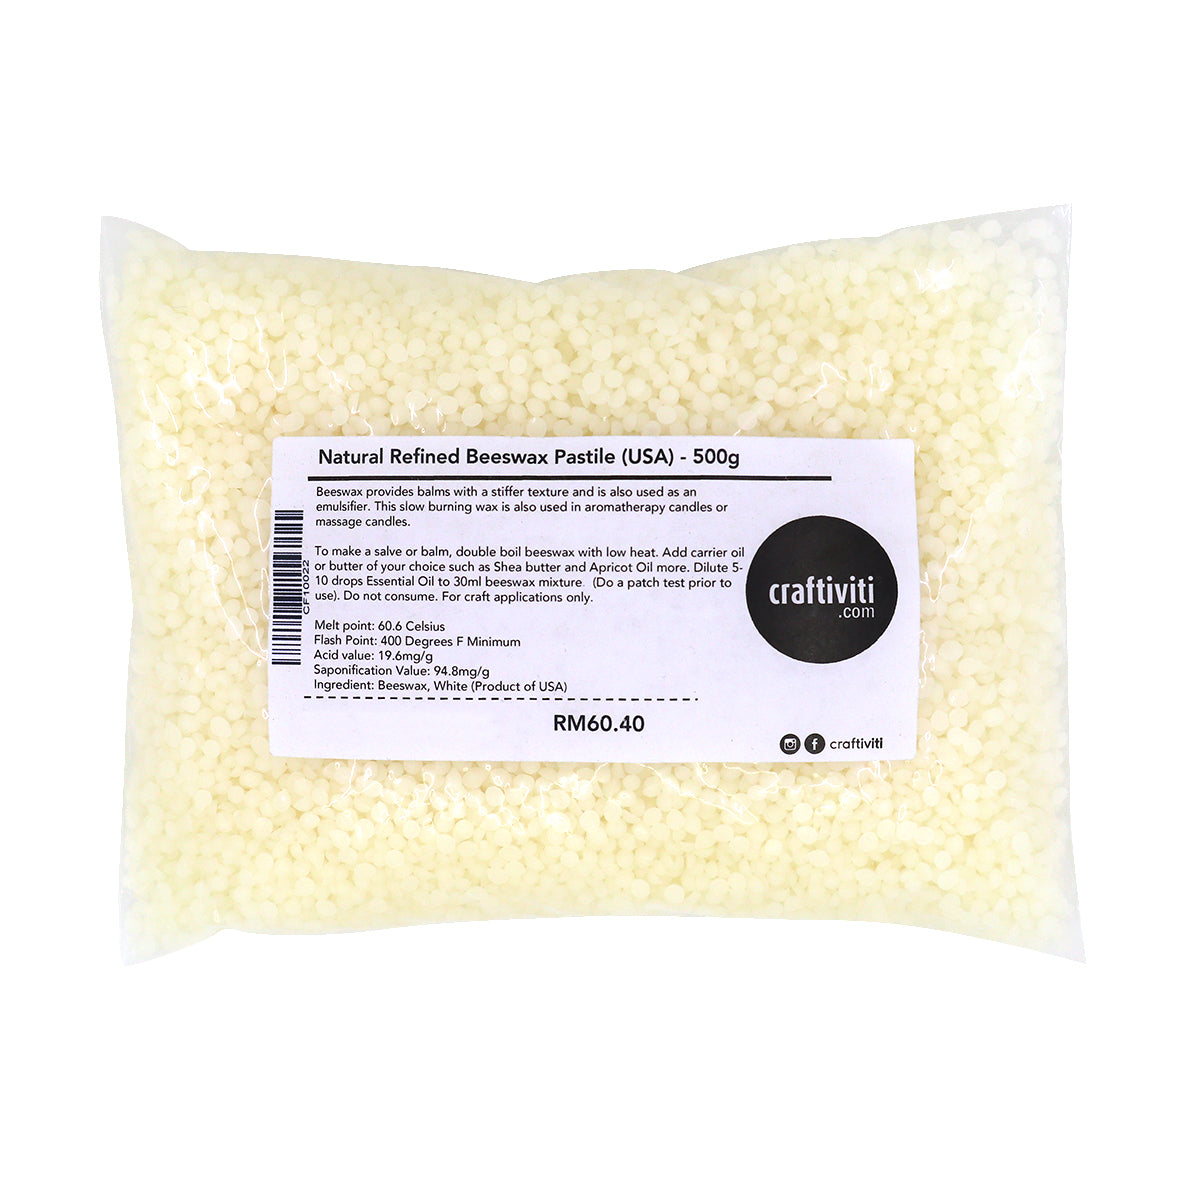 Refined Natural Beeswax Pastille (USA)